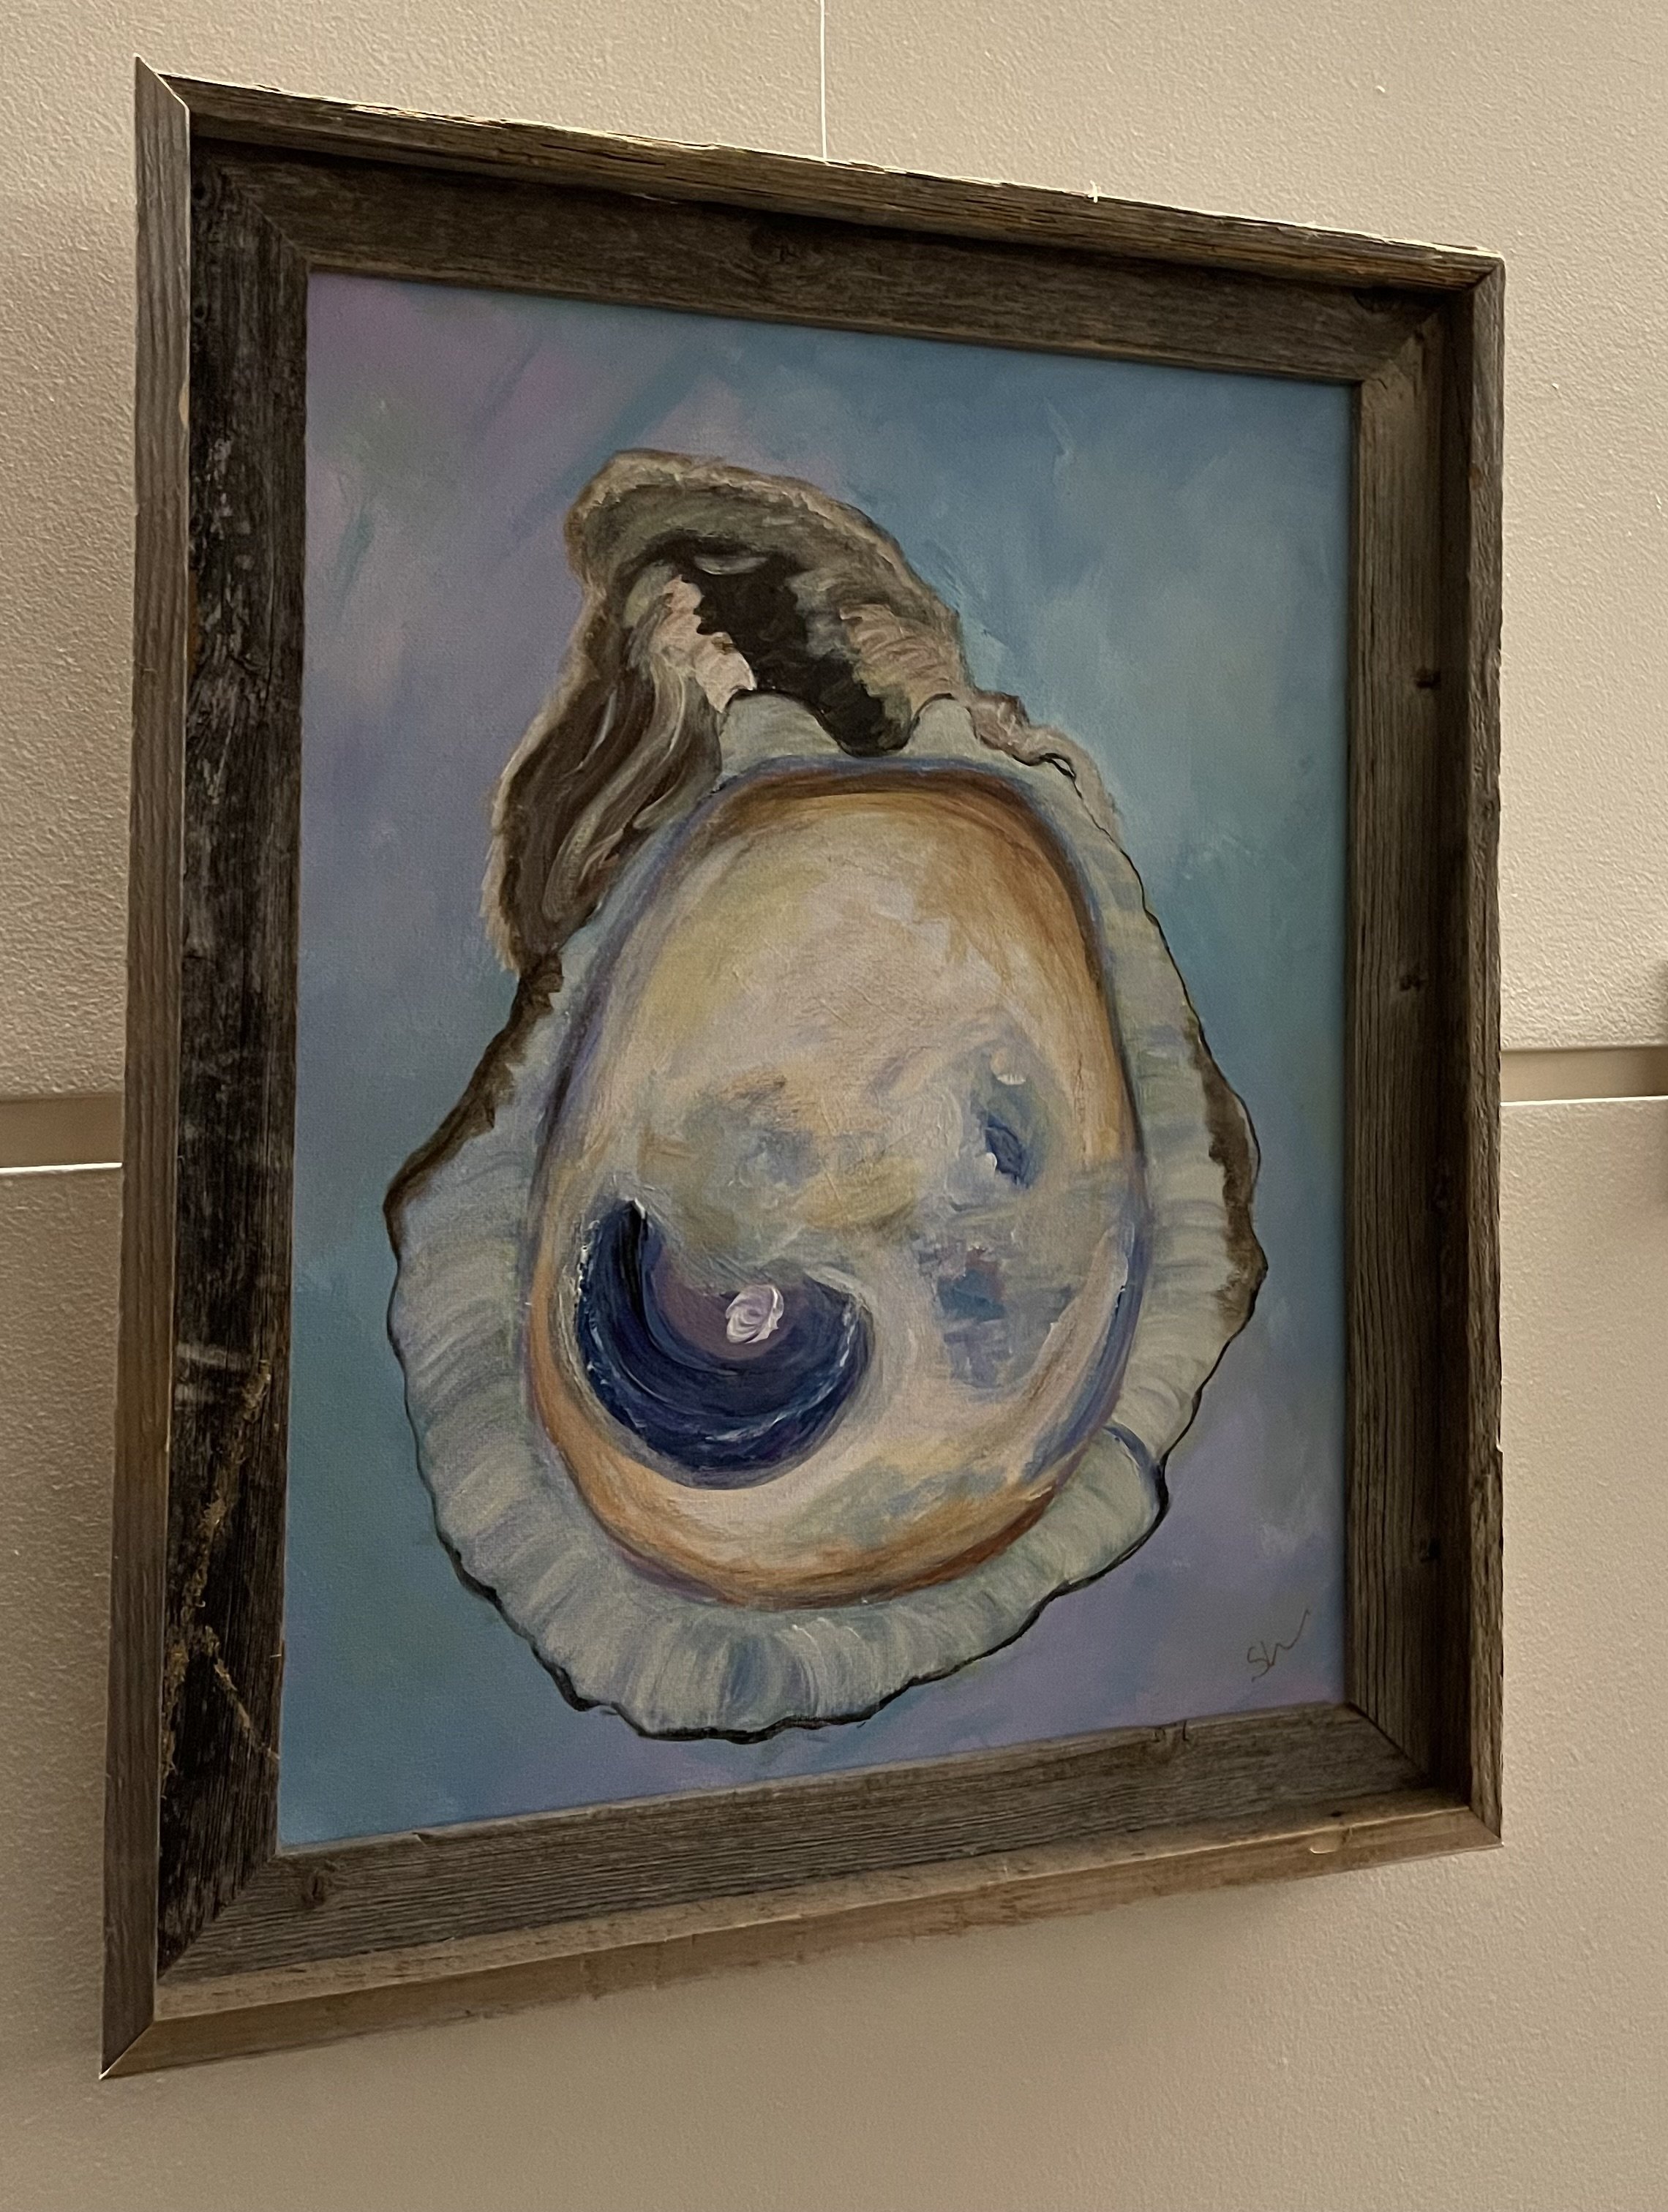 Susie Glauner - "Oyster", acrylic on canvas 